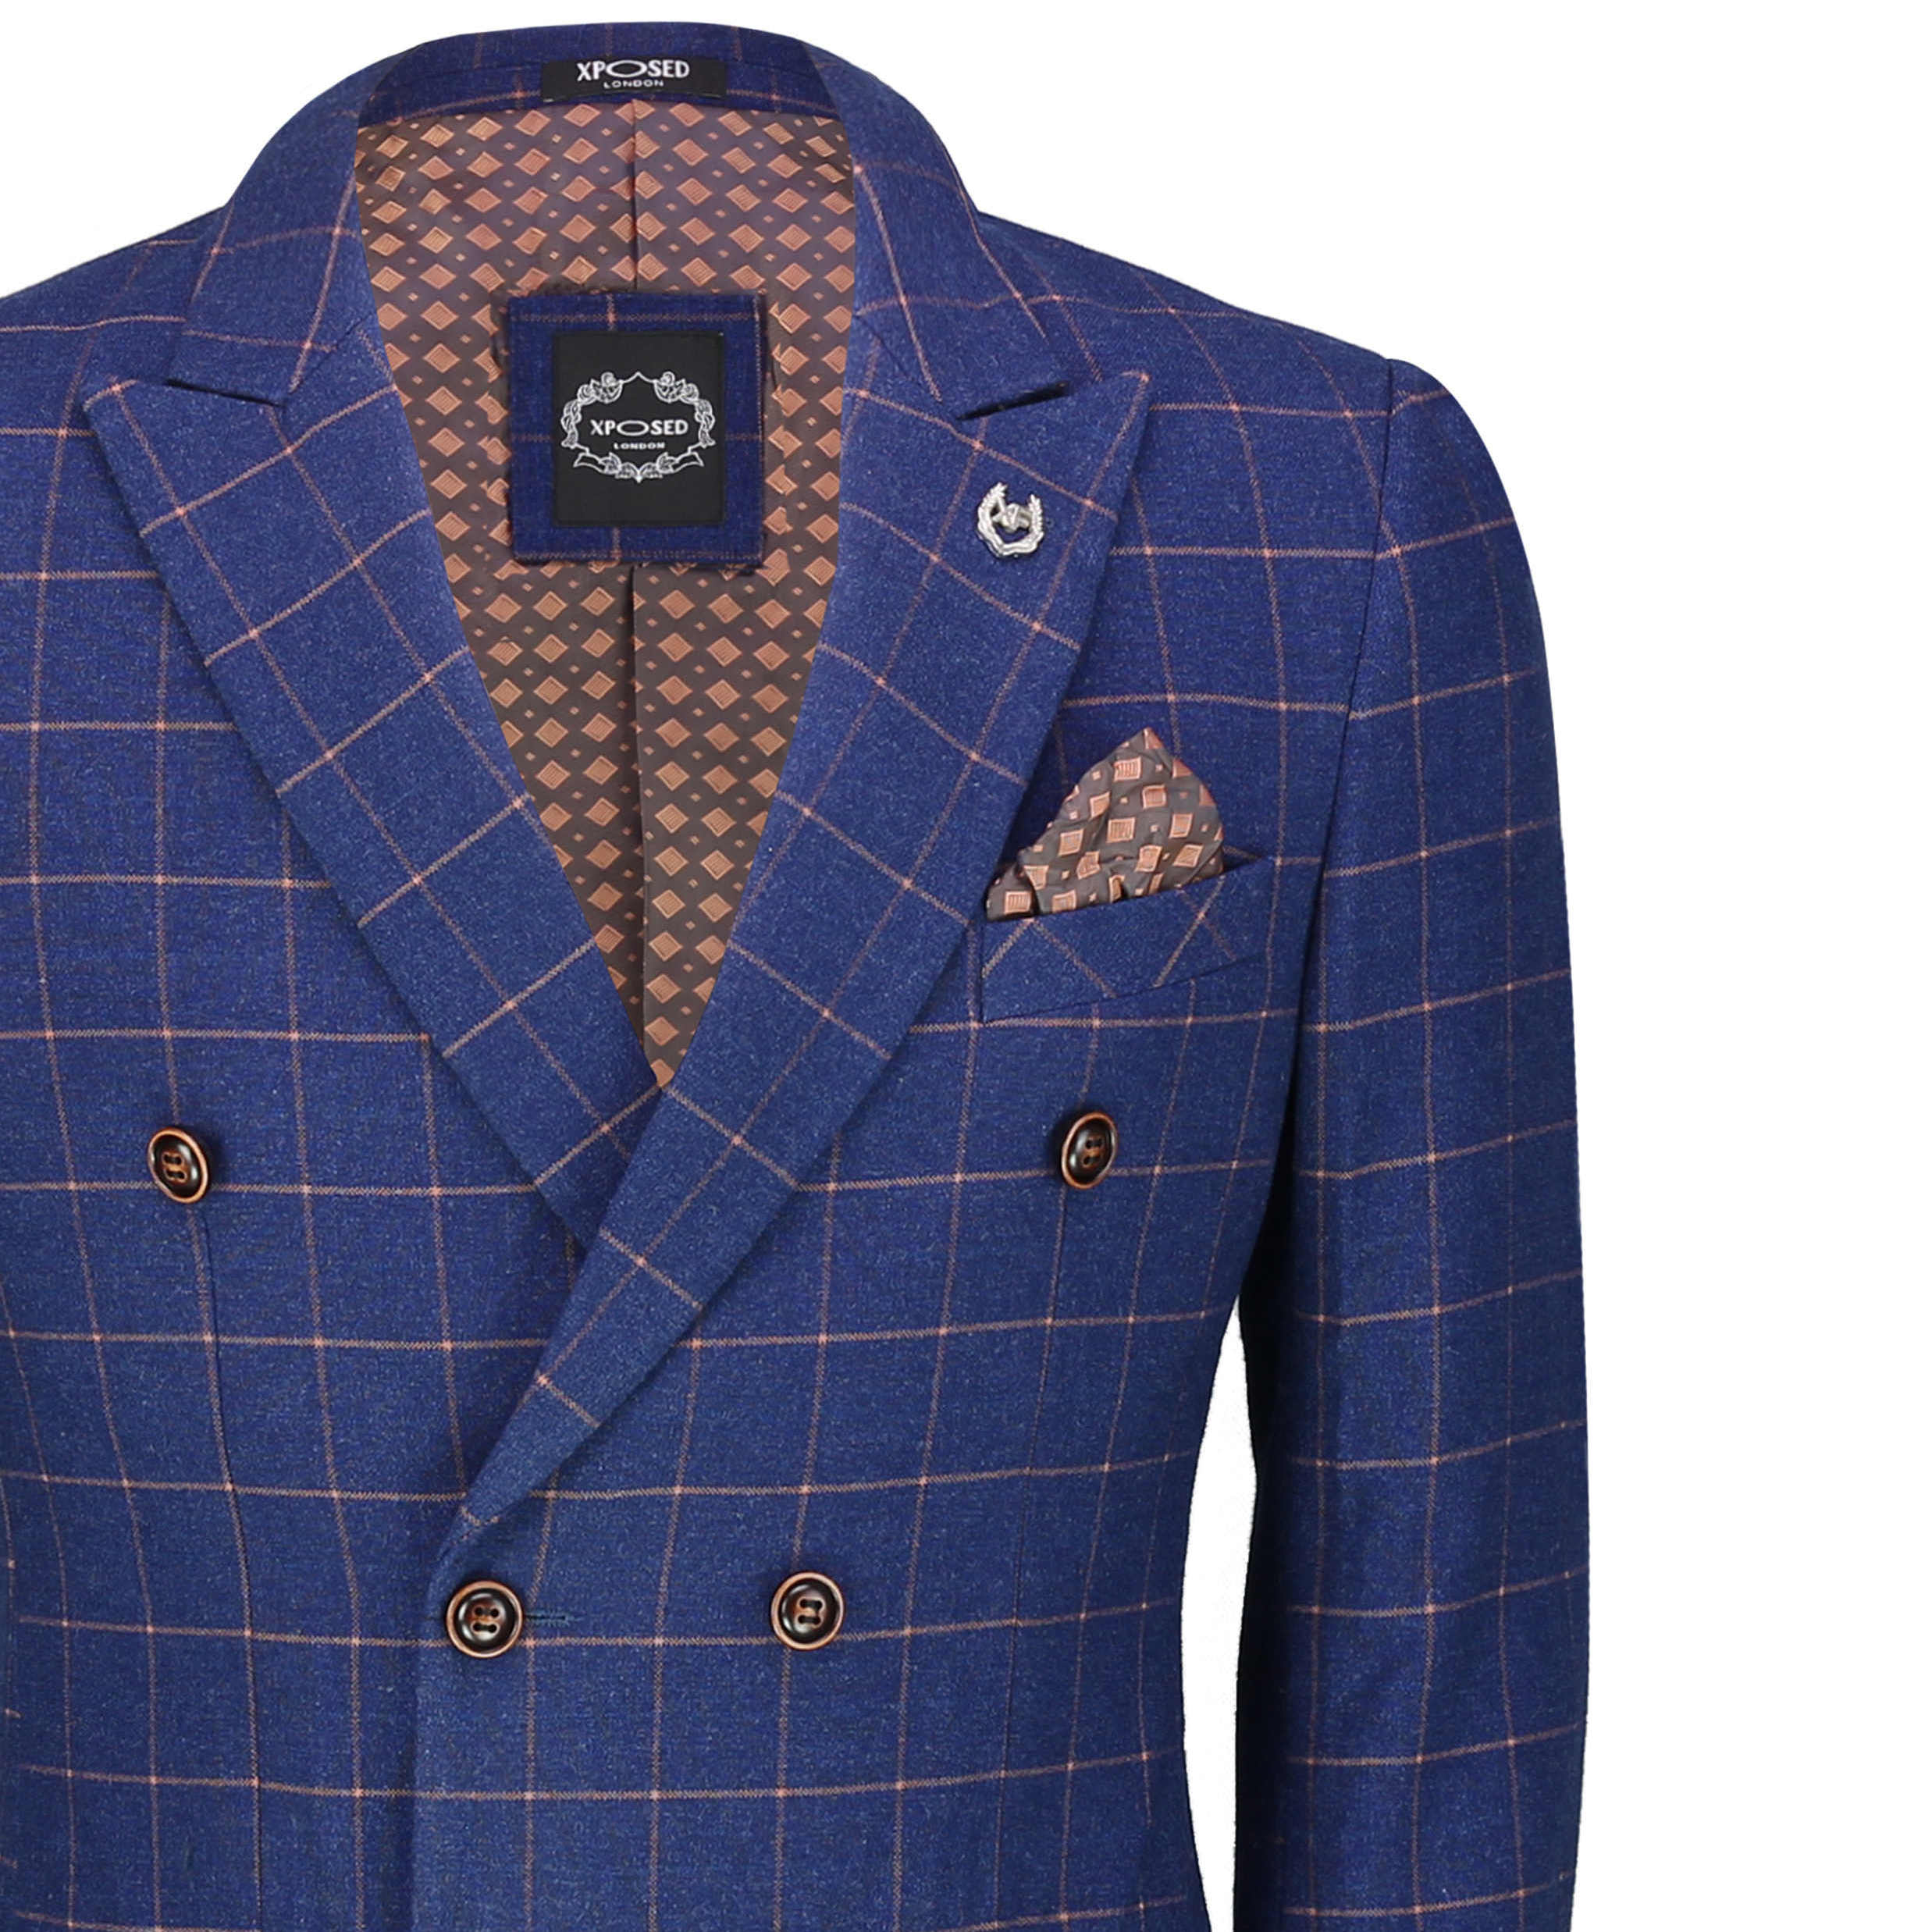 Mens Double Breasted Blazer Blue Windowpane Check Tailored Fit 